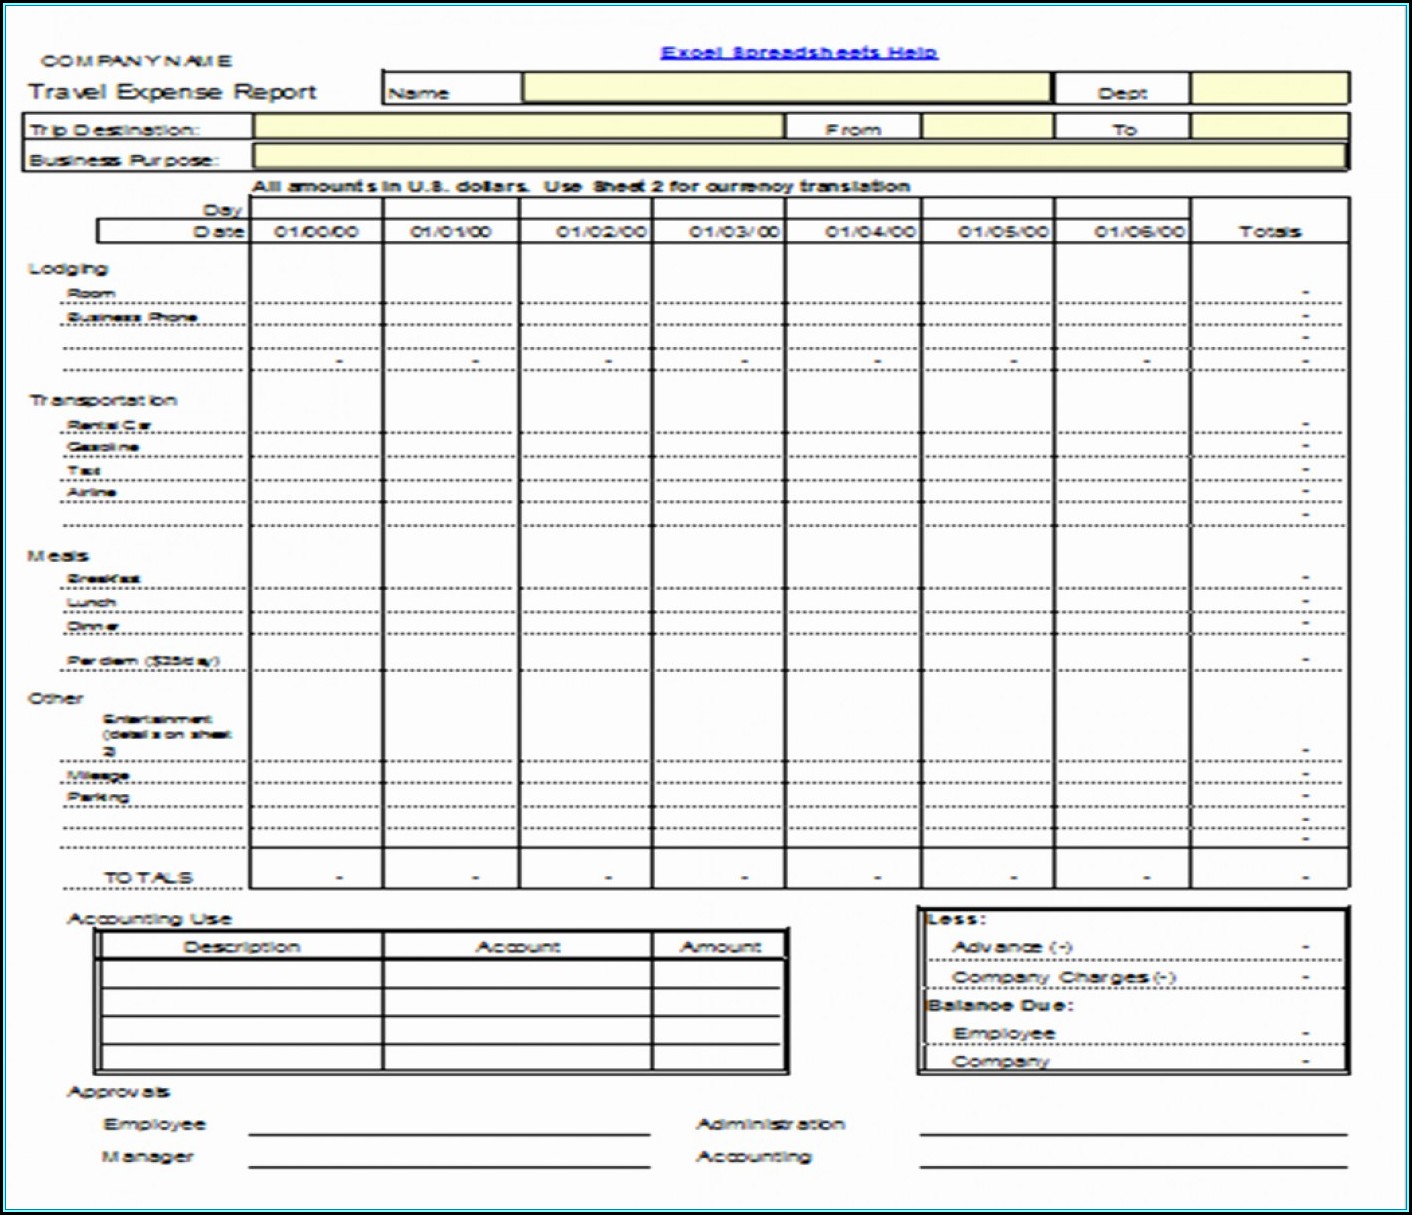 Travel Expense Report Template Excel 2013